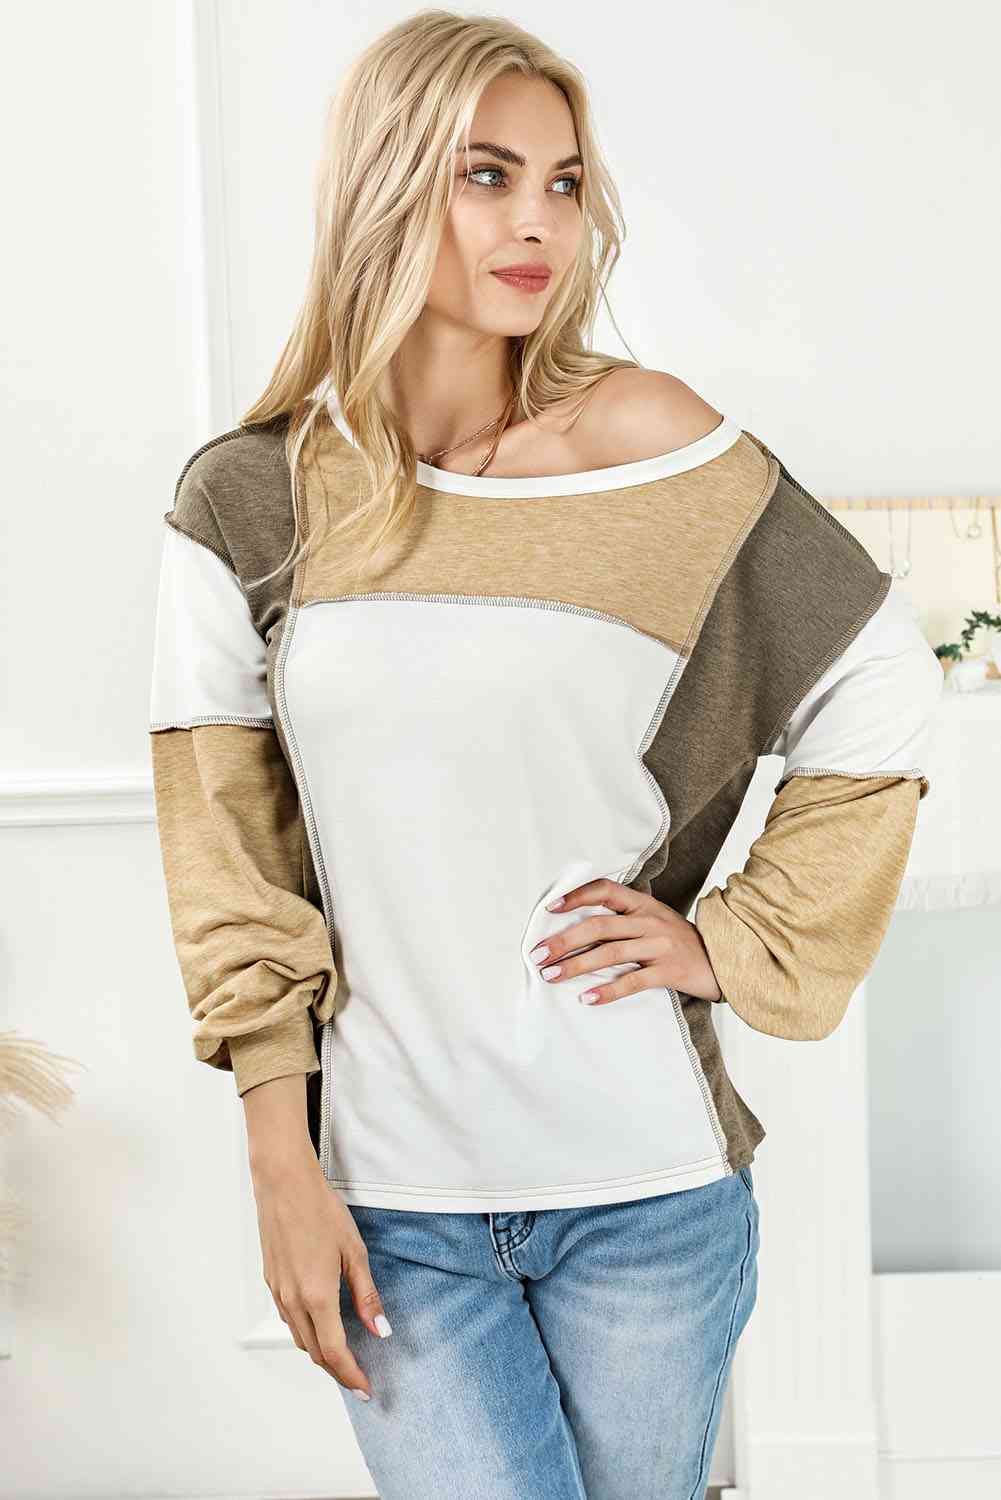 Color Block Exposed Seam Boat Neck Top - GemThreads Boutique